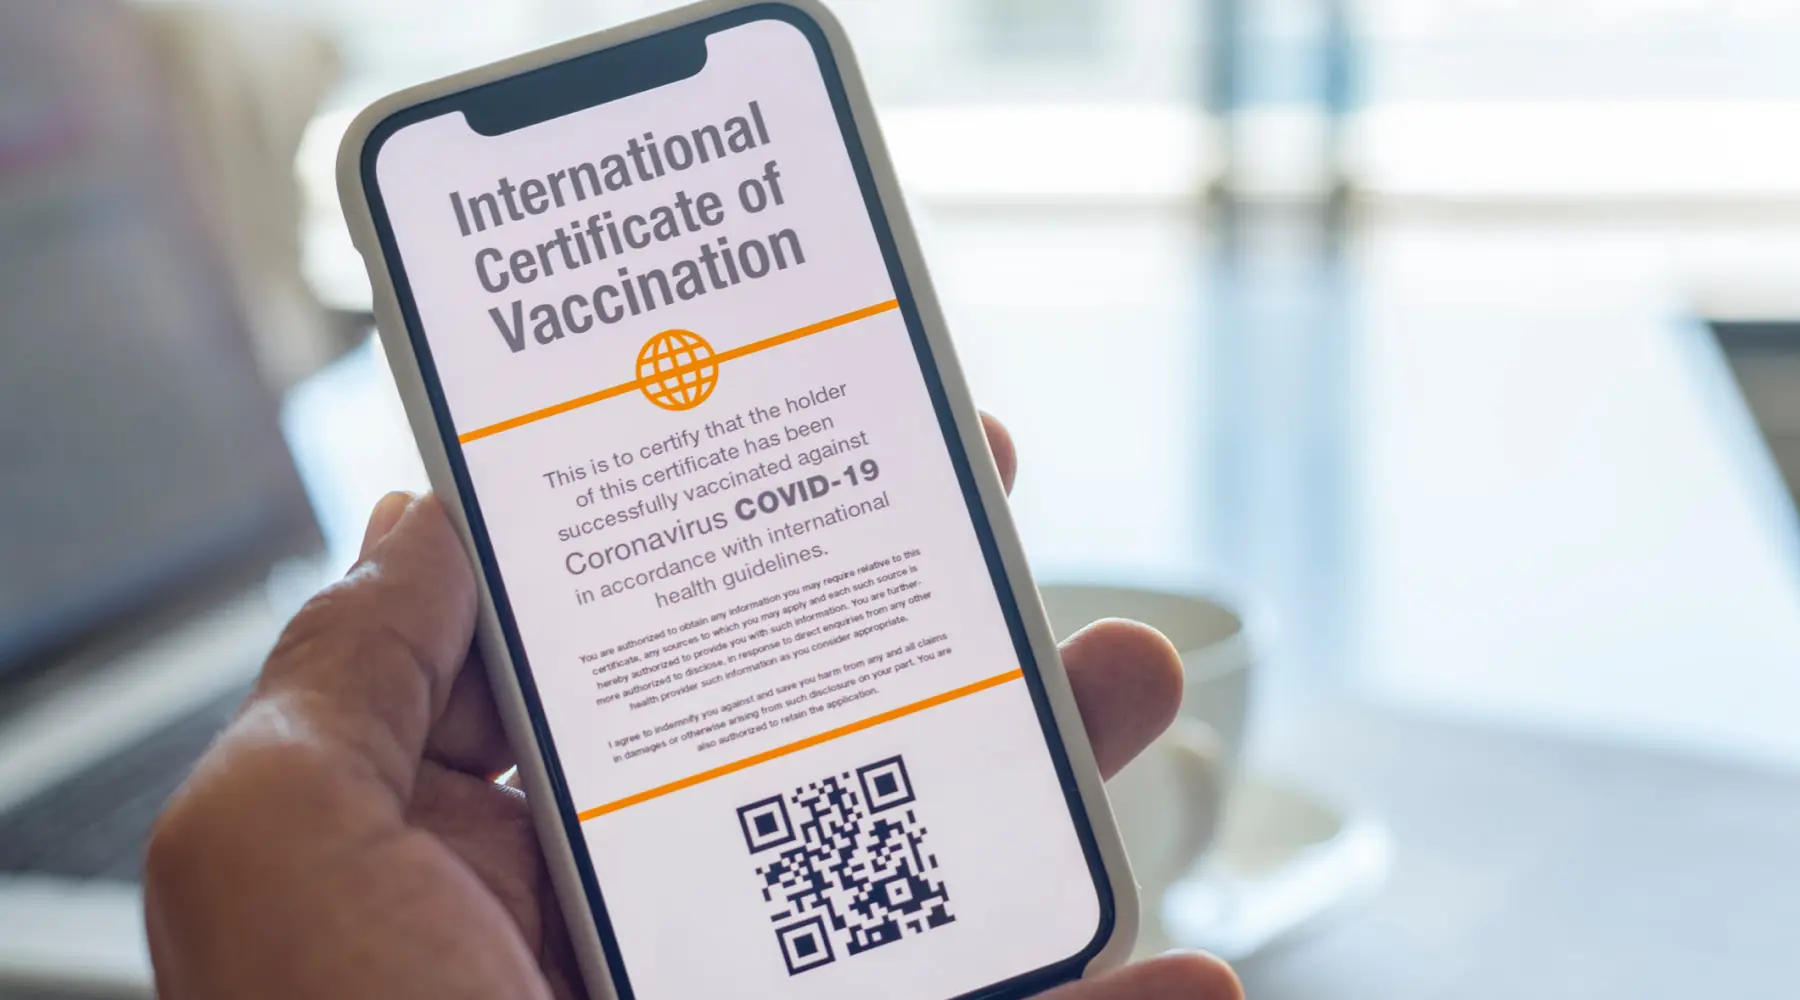 2021 travel may require a COVID-19 vaccine passport — here’s how to get one